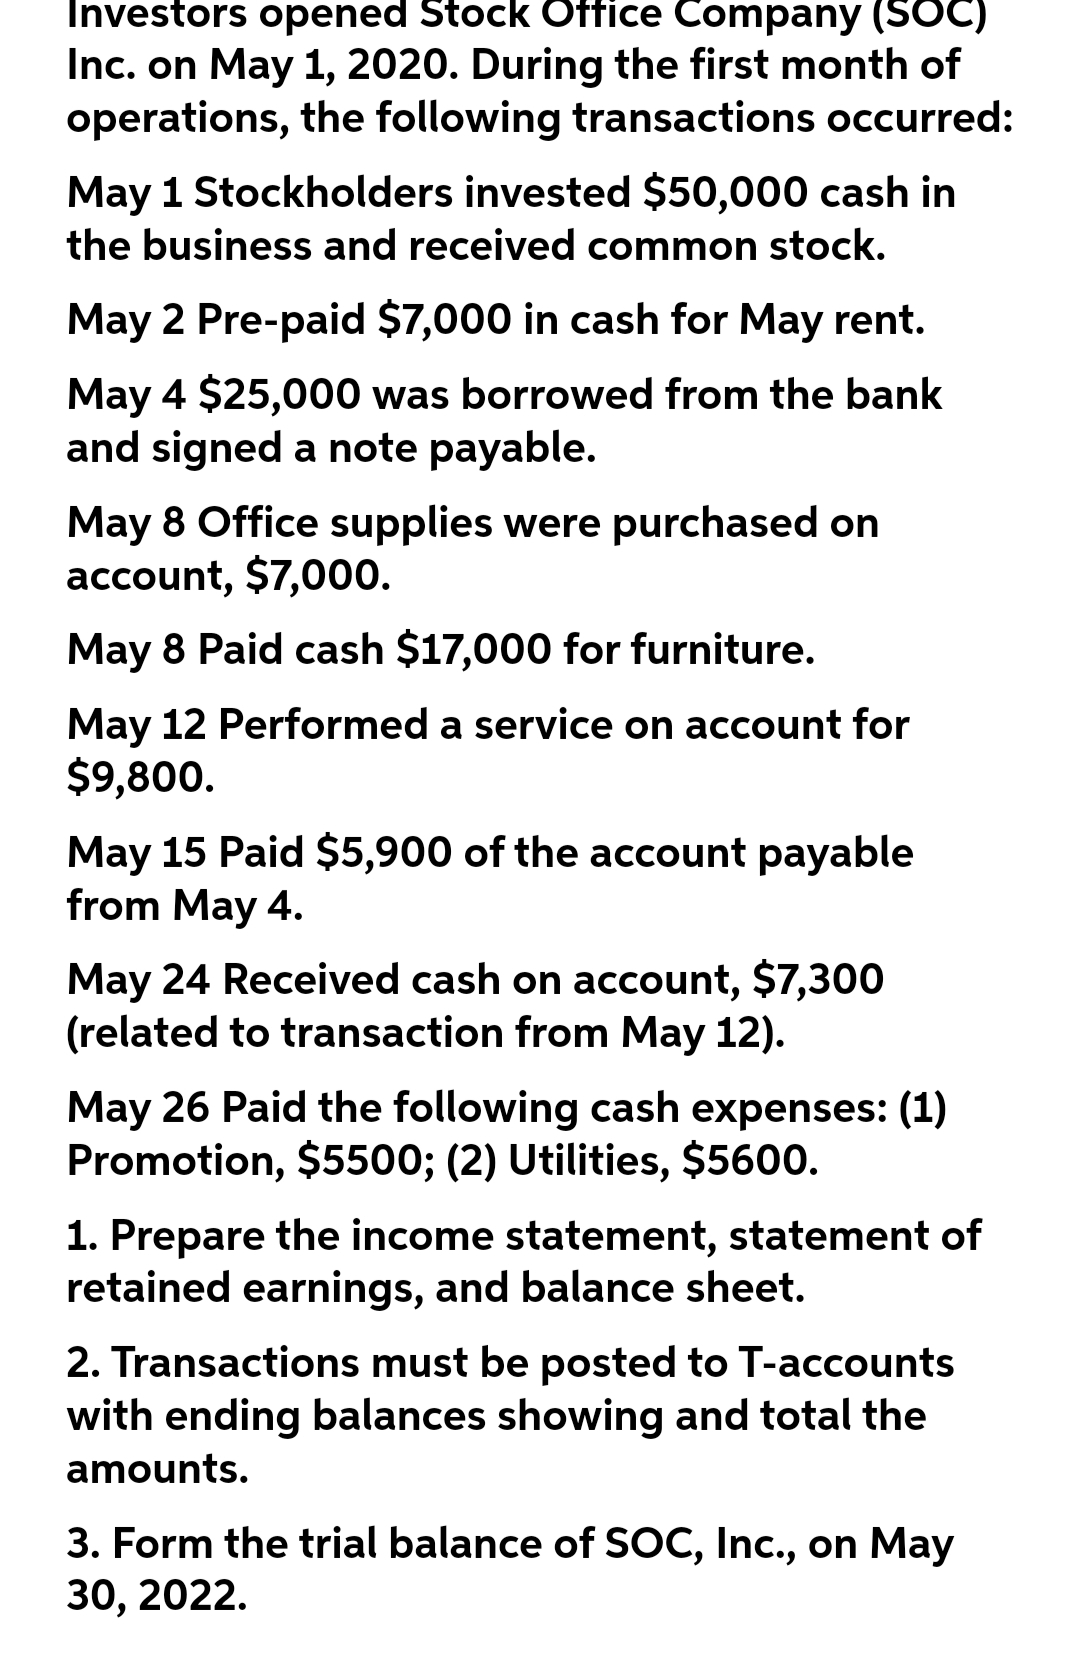 Investors opened Stock Office Company (SOC)
Inc. on May 1, 2020. During the first month of
operations, the following transactions occurred:
May 1 Stockholders invested $50,000 cash in
the business and received common stock.
May 2 Pre-paid $7,000 in cash for May rent.
May 4 $25,000 was borrowed from the bank
and signed a note payable.
May 8 Office supplies were purchased on
account, $7,000.
May 8 Paid cash $17,000 for furniture.
May 12 Performed a service on account for
$9,800.
May 15 Paid $5,900 of the account payable
from May 4.
May 24 Received cash on account, $7,300
(related to transaction from May 12).
May 26 Paid the following cash expenses: (1)
Promotion, $5500; (2) Utilities, $5600.
1. Prepare the income statement, statement of
retained earnings, and balance sheet.
2. Transactions must be posted to T-accounts
with ending balances showing and total the
amounts.
3. Form the trial balance of SOC, Inc., on May
30, 2022.